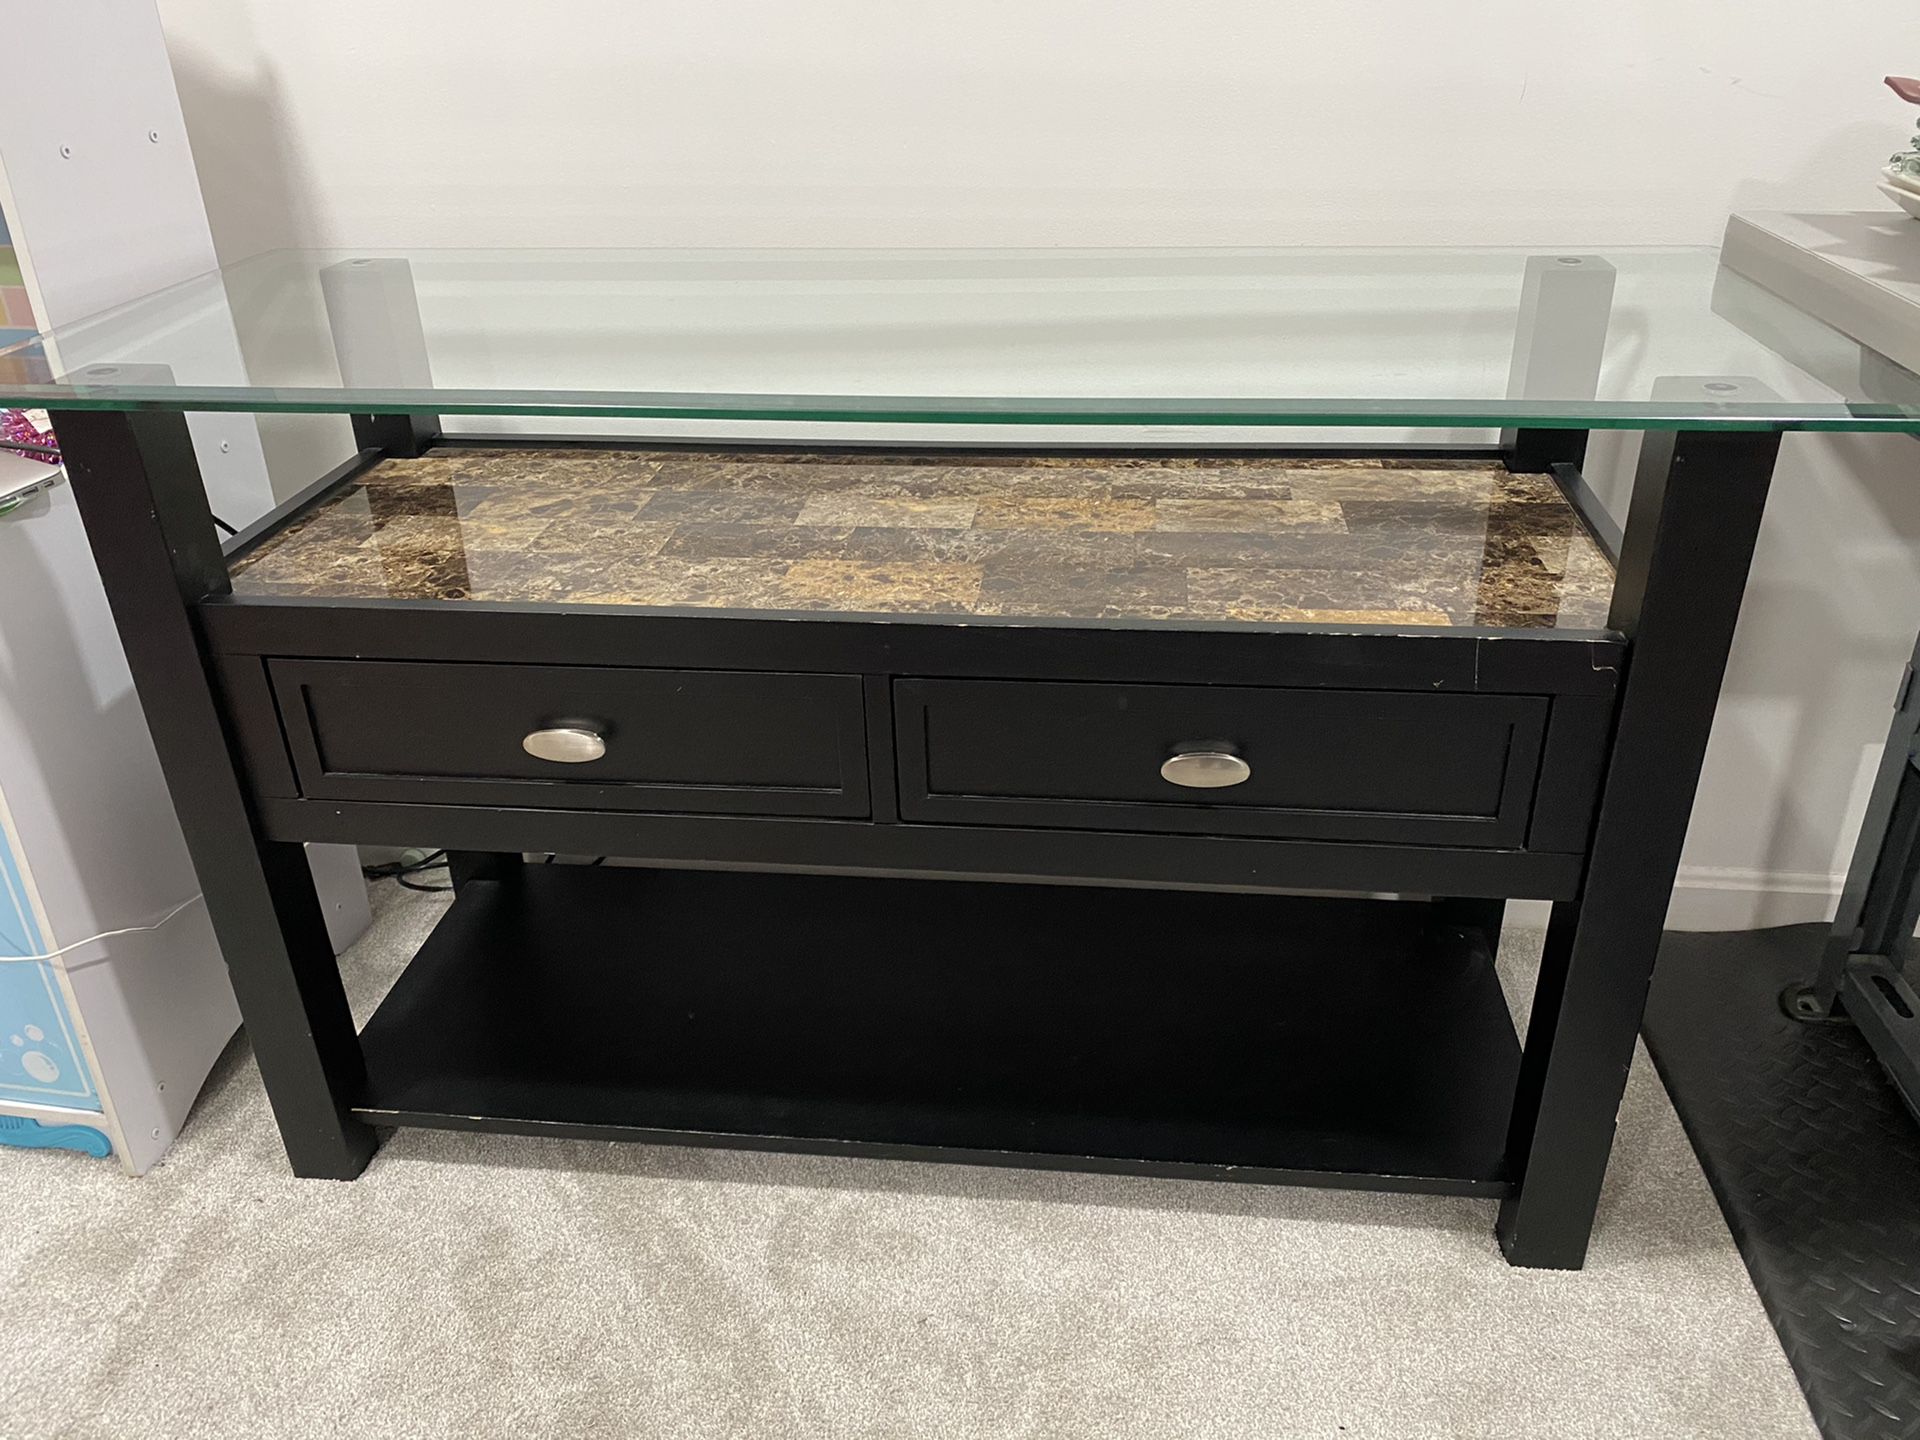 Glass top table with 2 drawers